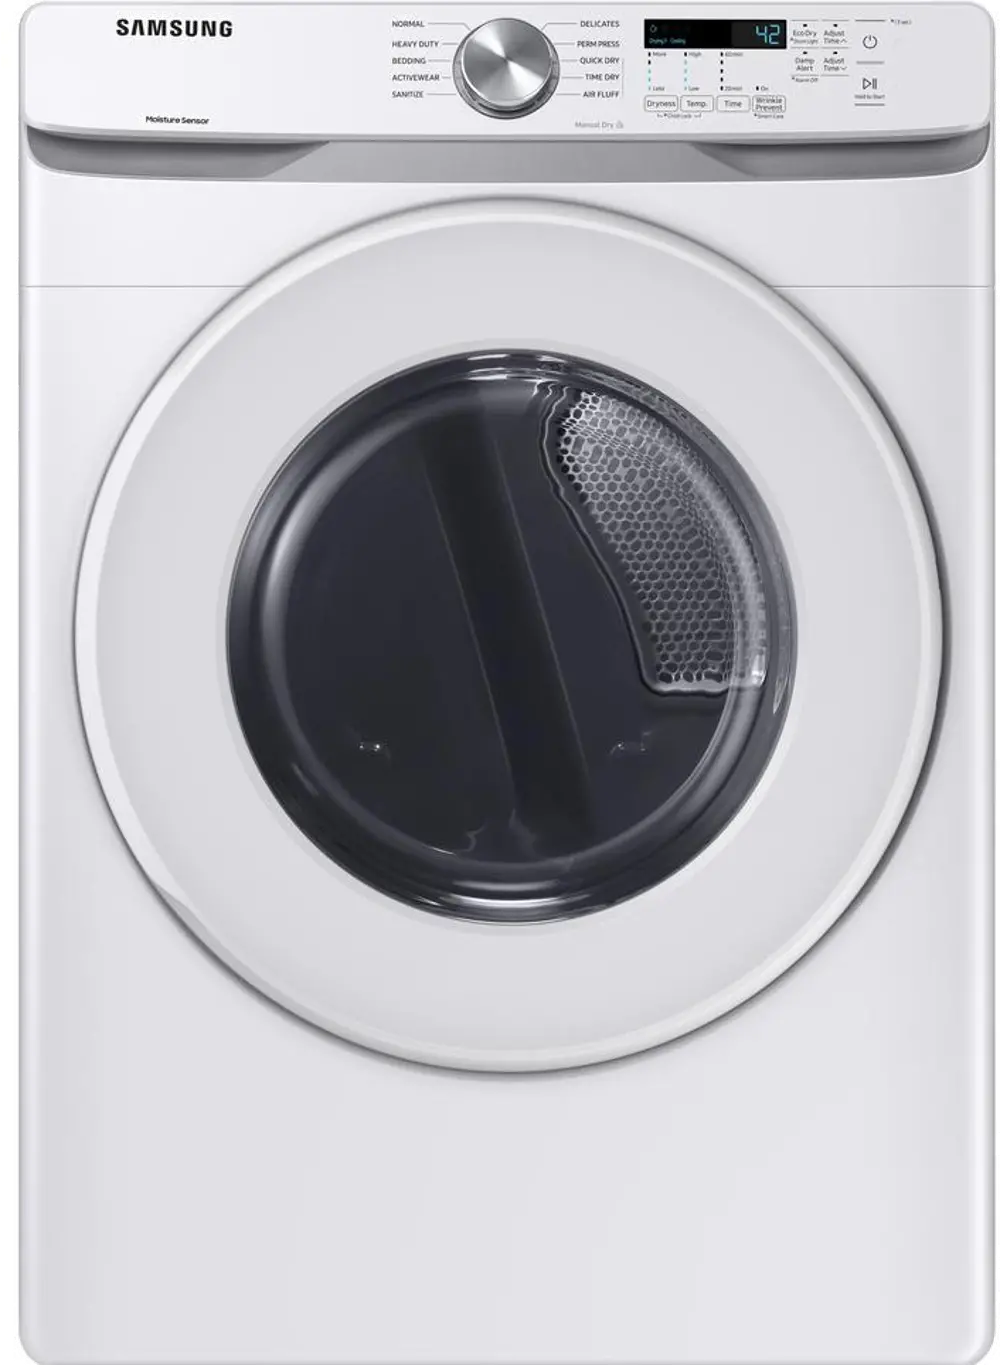 DVE45T6000W Samsung Electric Dryer with Sensor Dry - 7.5 cu. ft. White-1